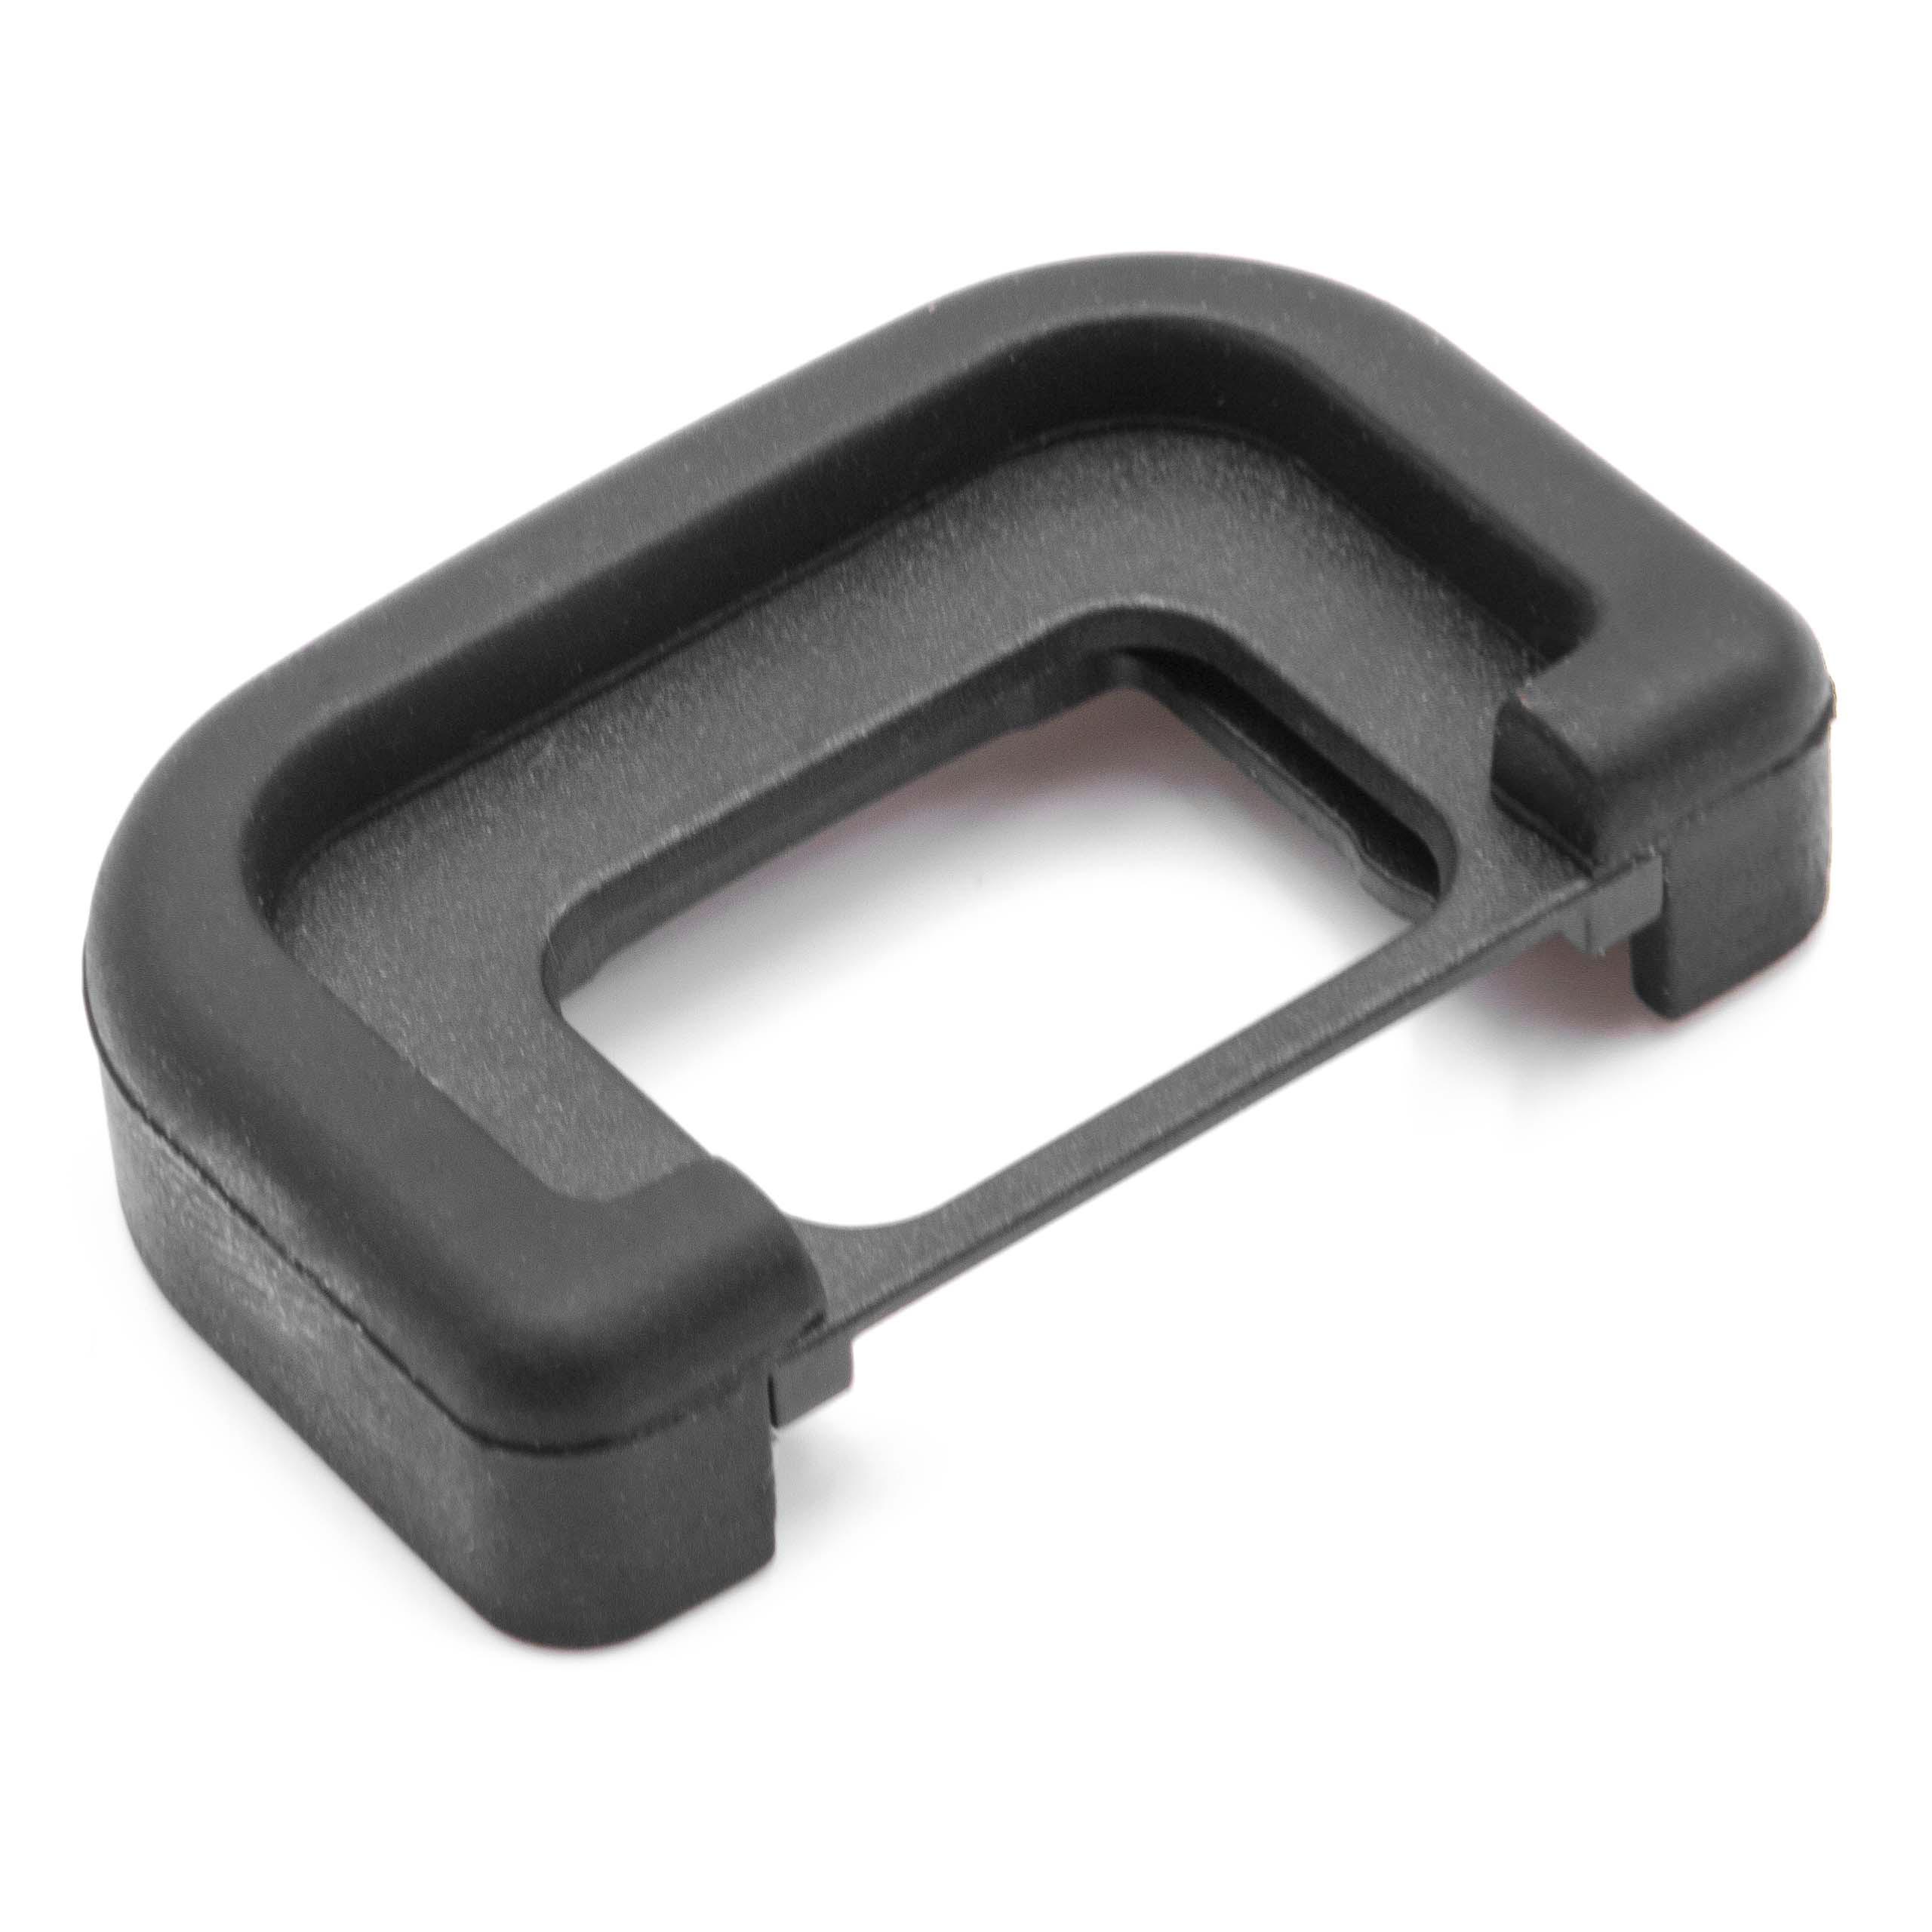 Eye Cup replaces Pentax FO for Pentax *ist etc., Plastic 